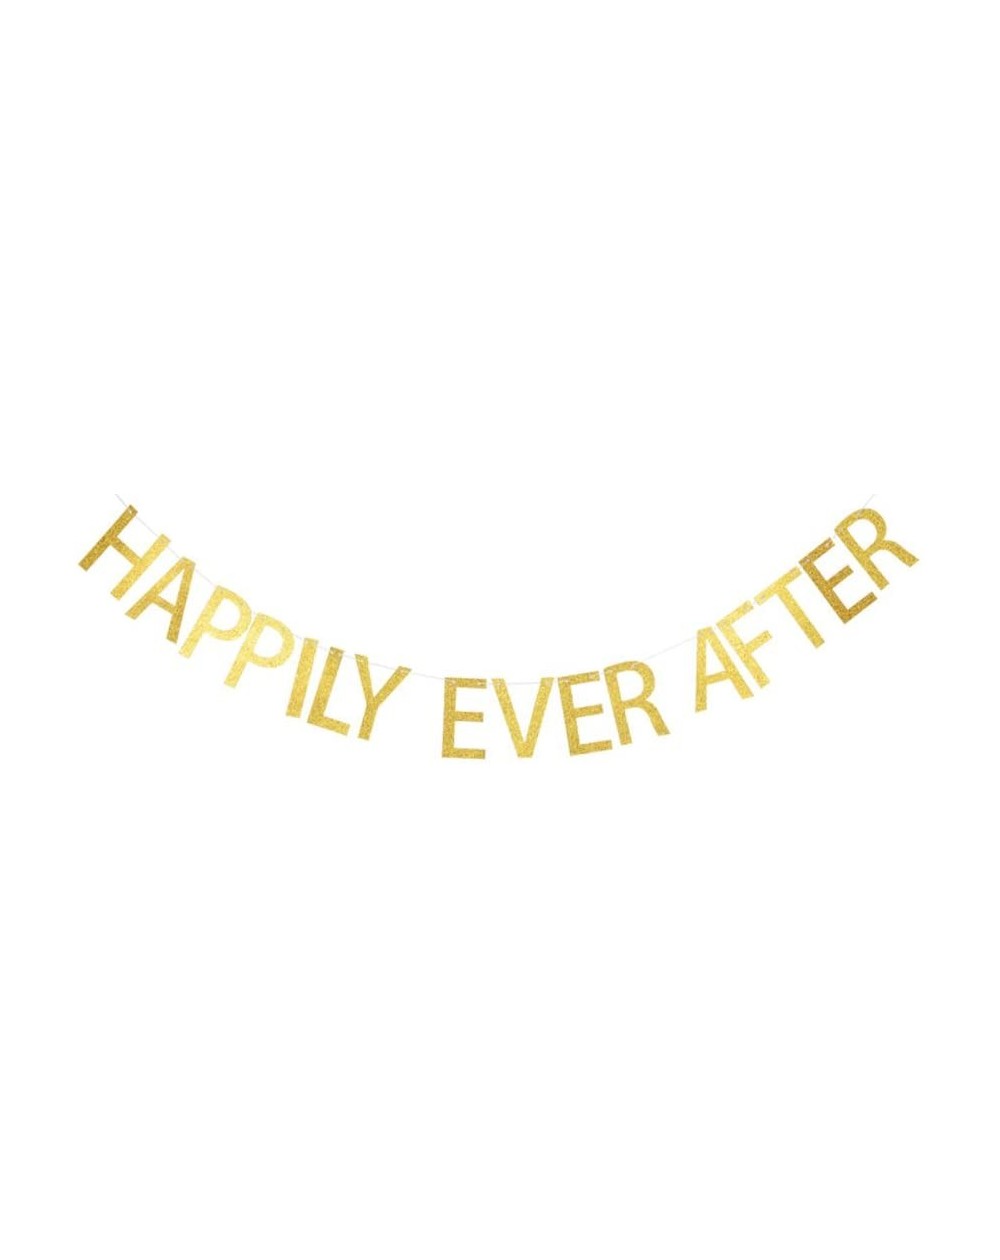 Banners & Garlands Happily Ever After Banner- Wedding/Engagement Party Photo Props Sign - CC18CQGTE5Y $10.88